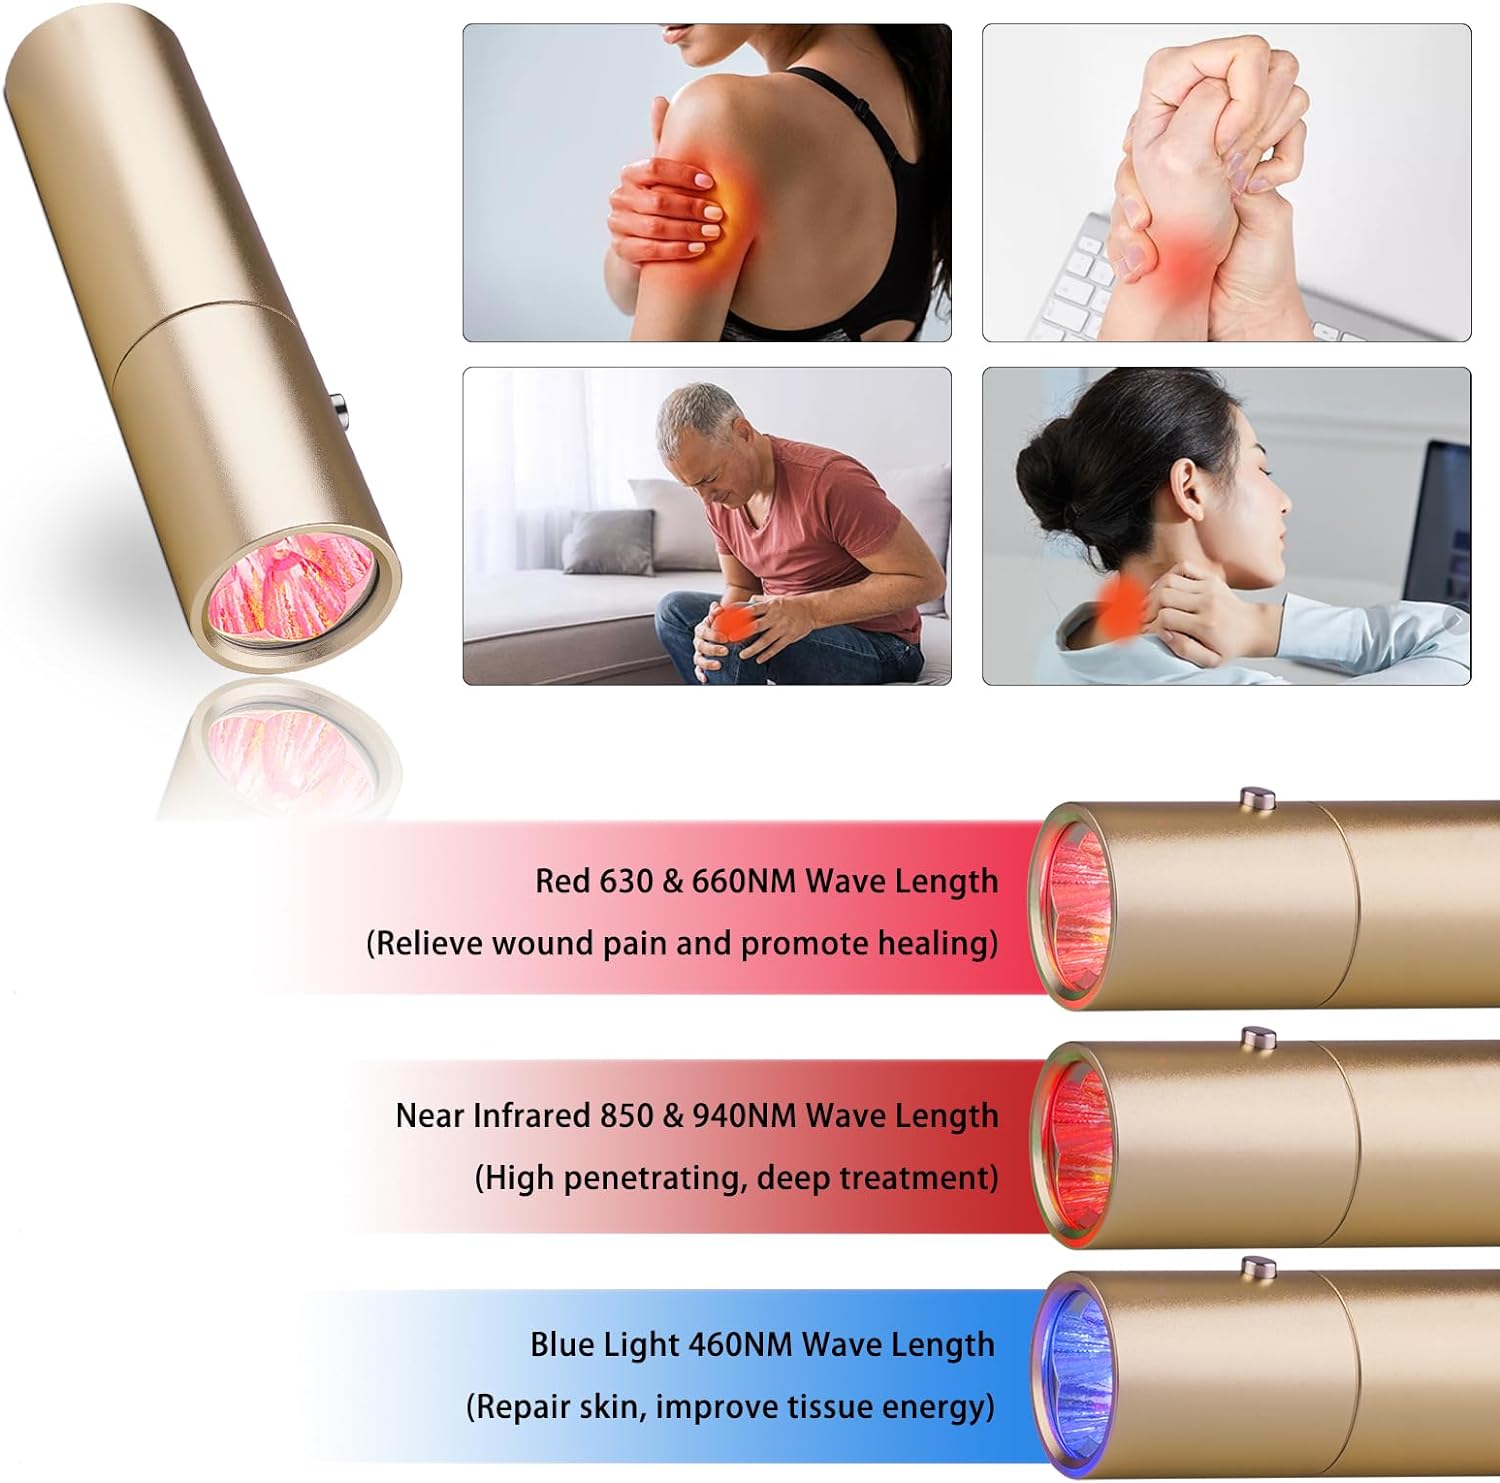 Red Light Therapy— Hotodeal Near Infrared Light Therapy for Body and Face Reduce Inflammation